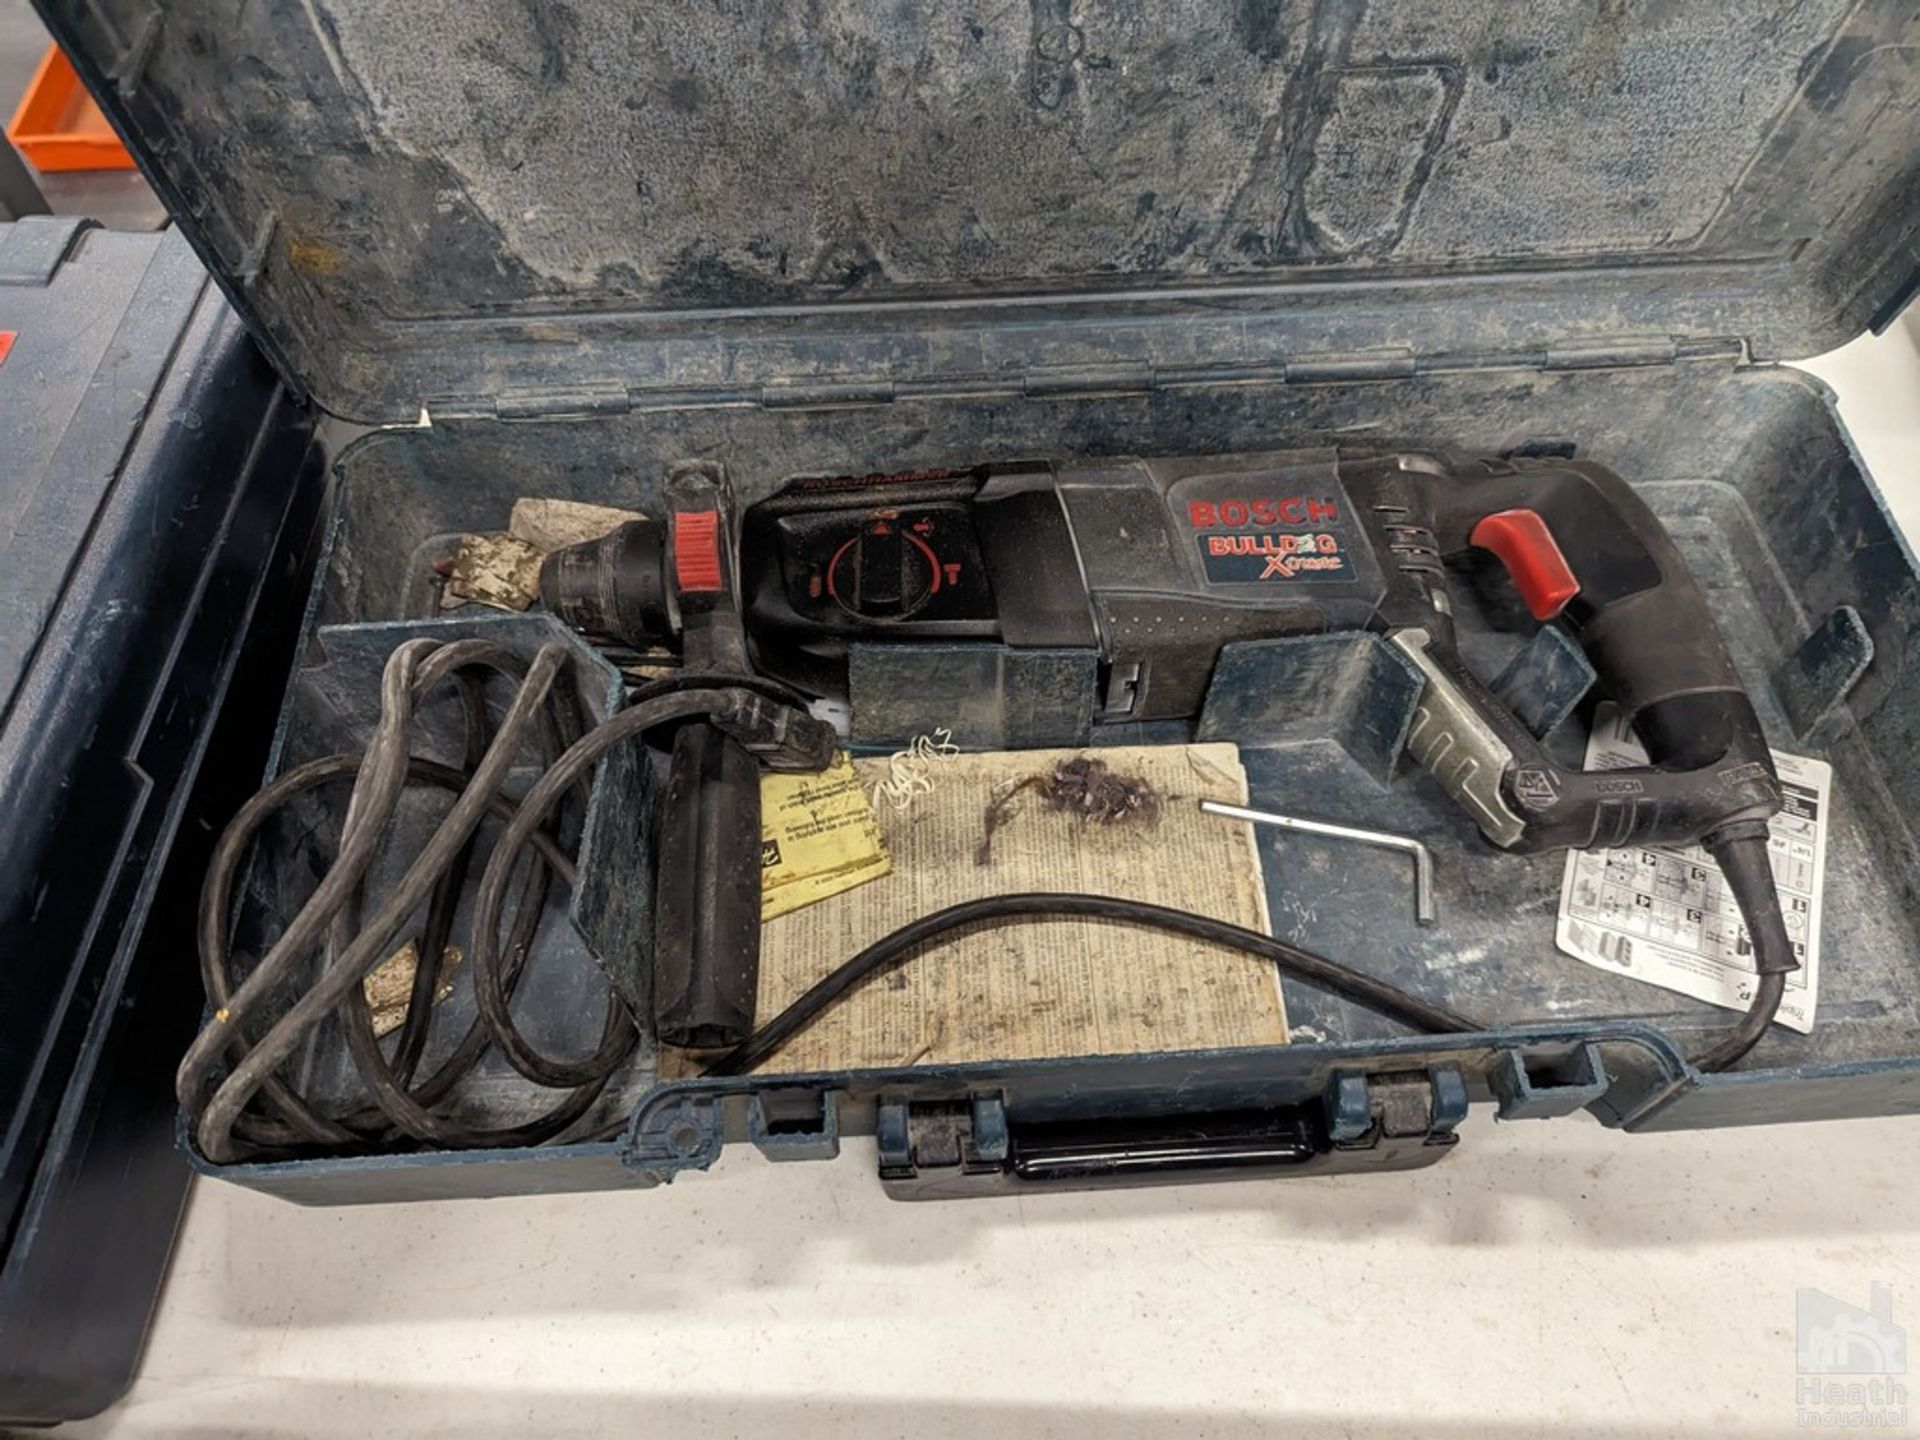 BOSCH BULLDOG EXTREME ROTARY HAMMER DRILL WITH CASE